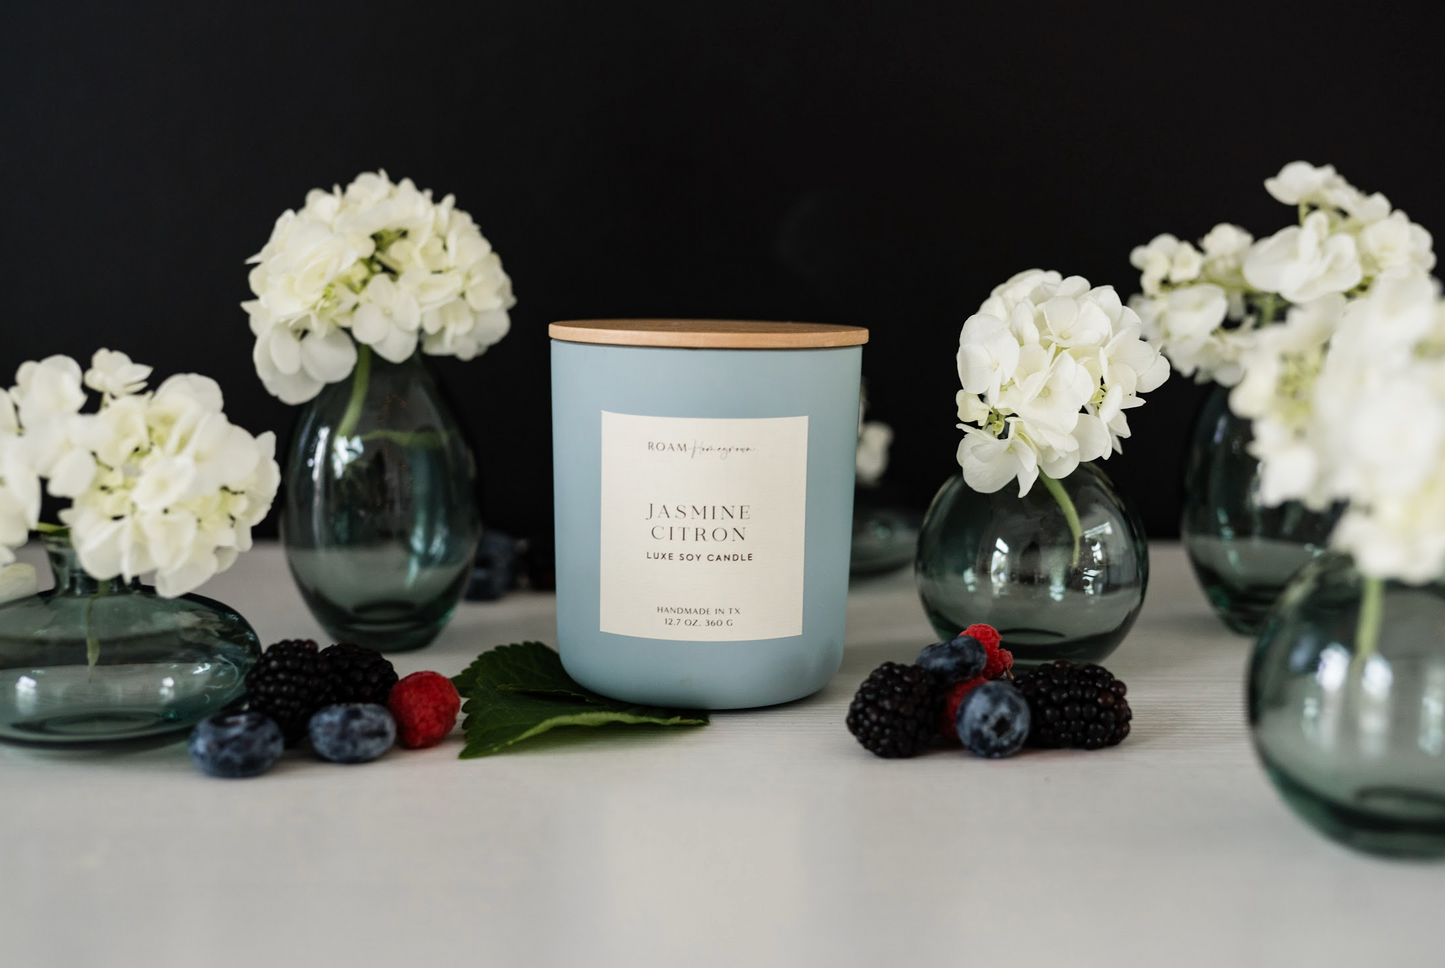 Brighter Days Soy Candle, Jasmine Citron - ROAM Homegrown